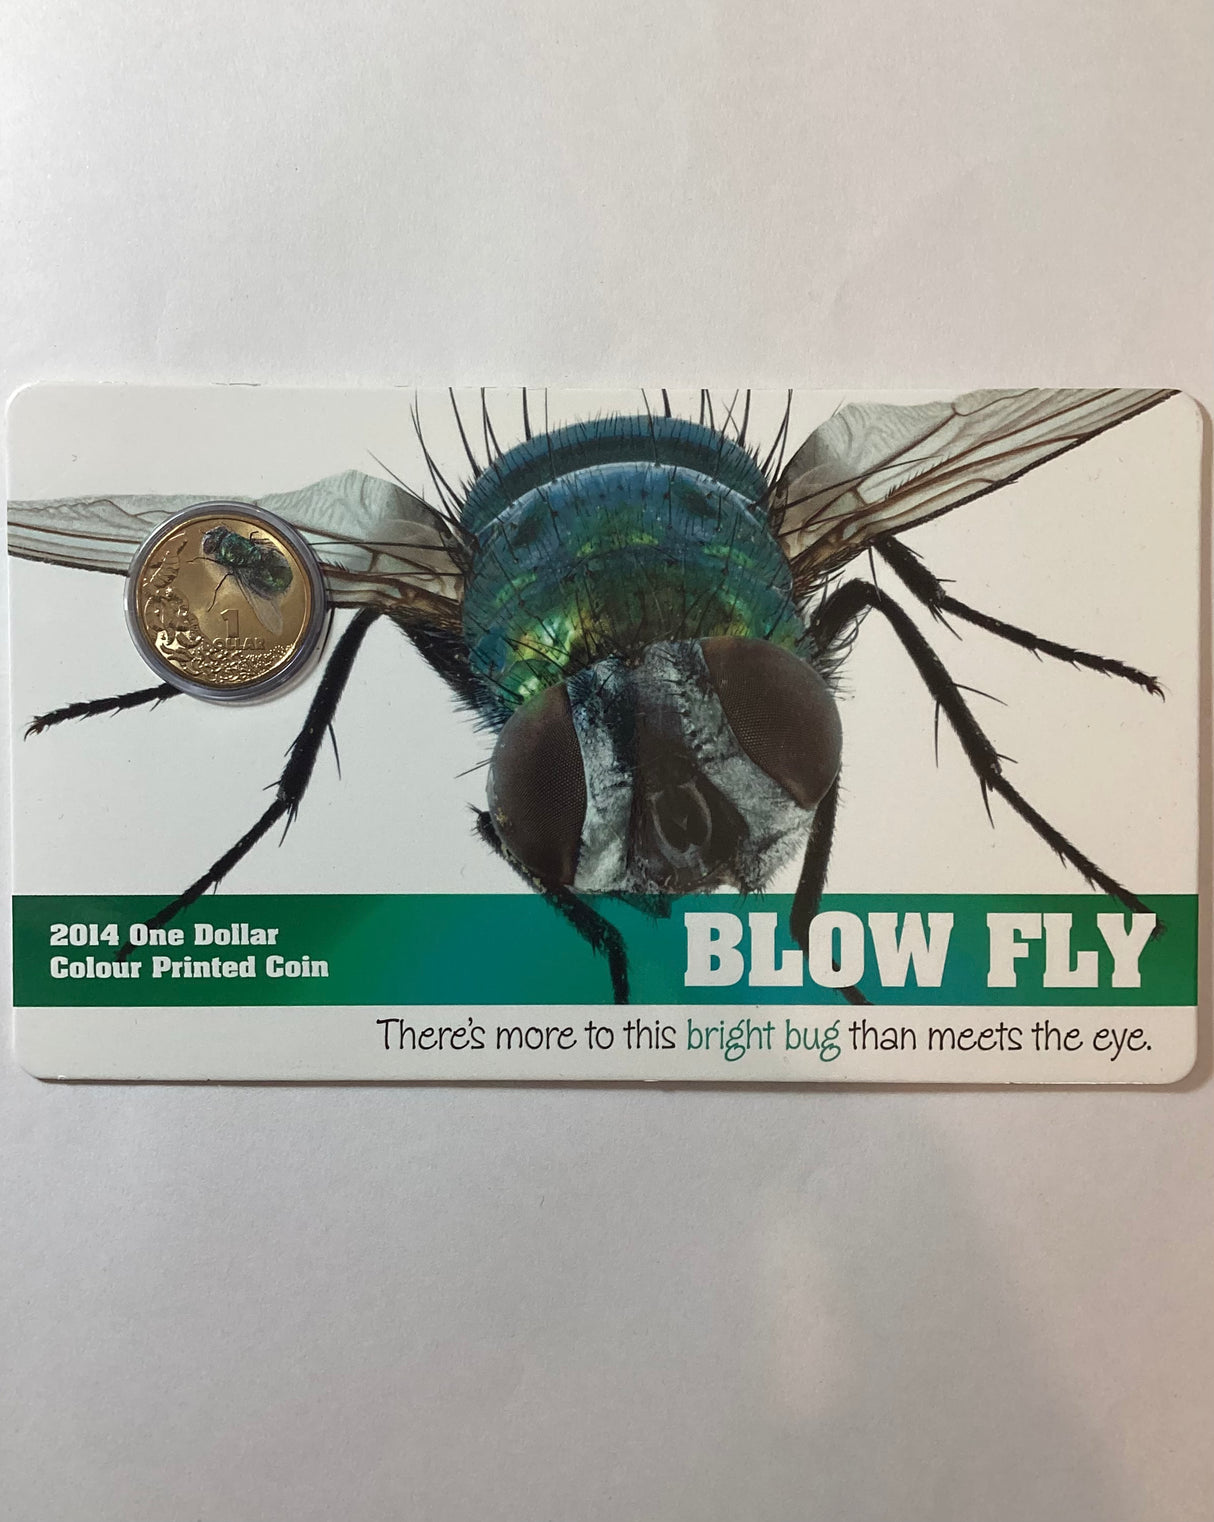 2014 $1 Blow Fly Colour Printed Coin